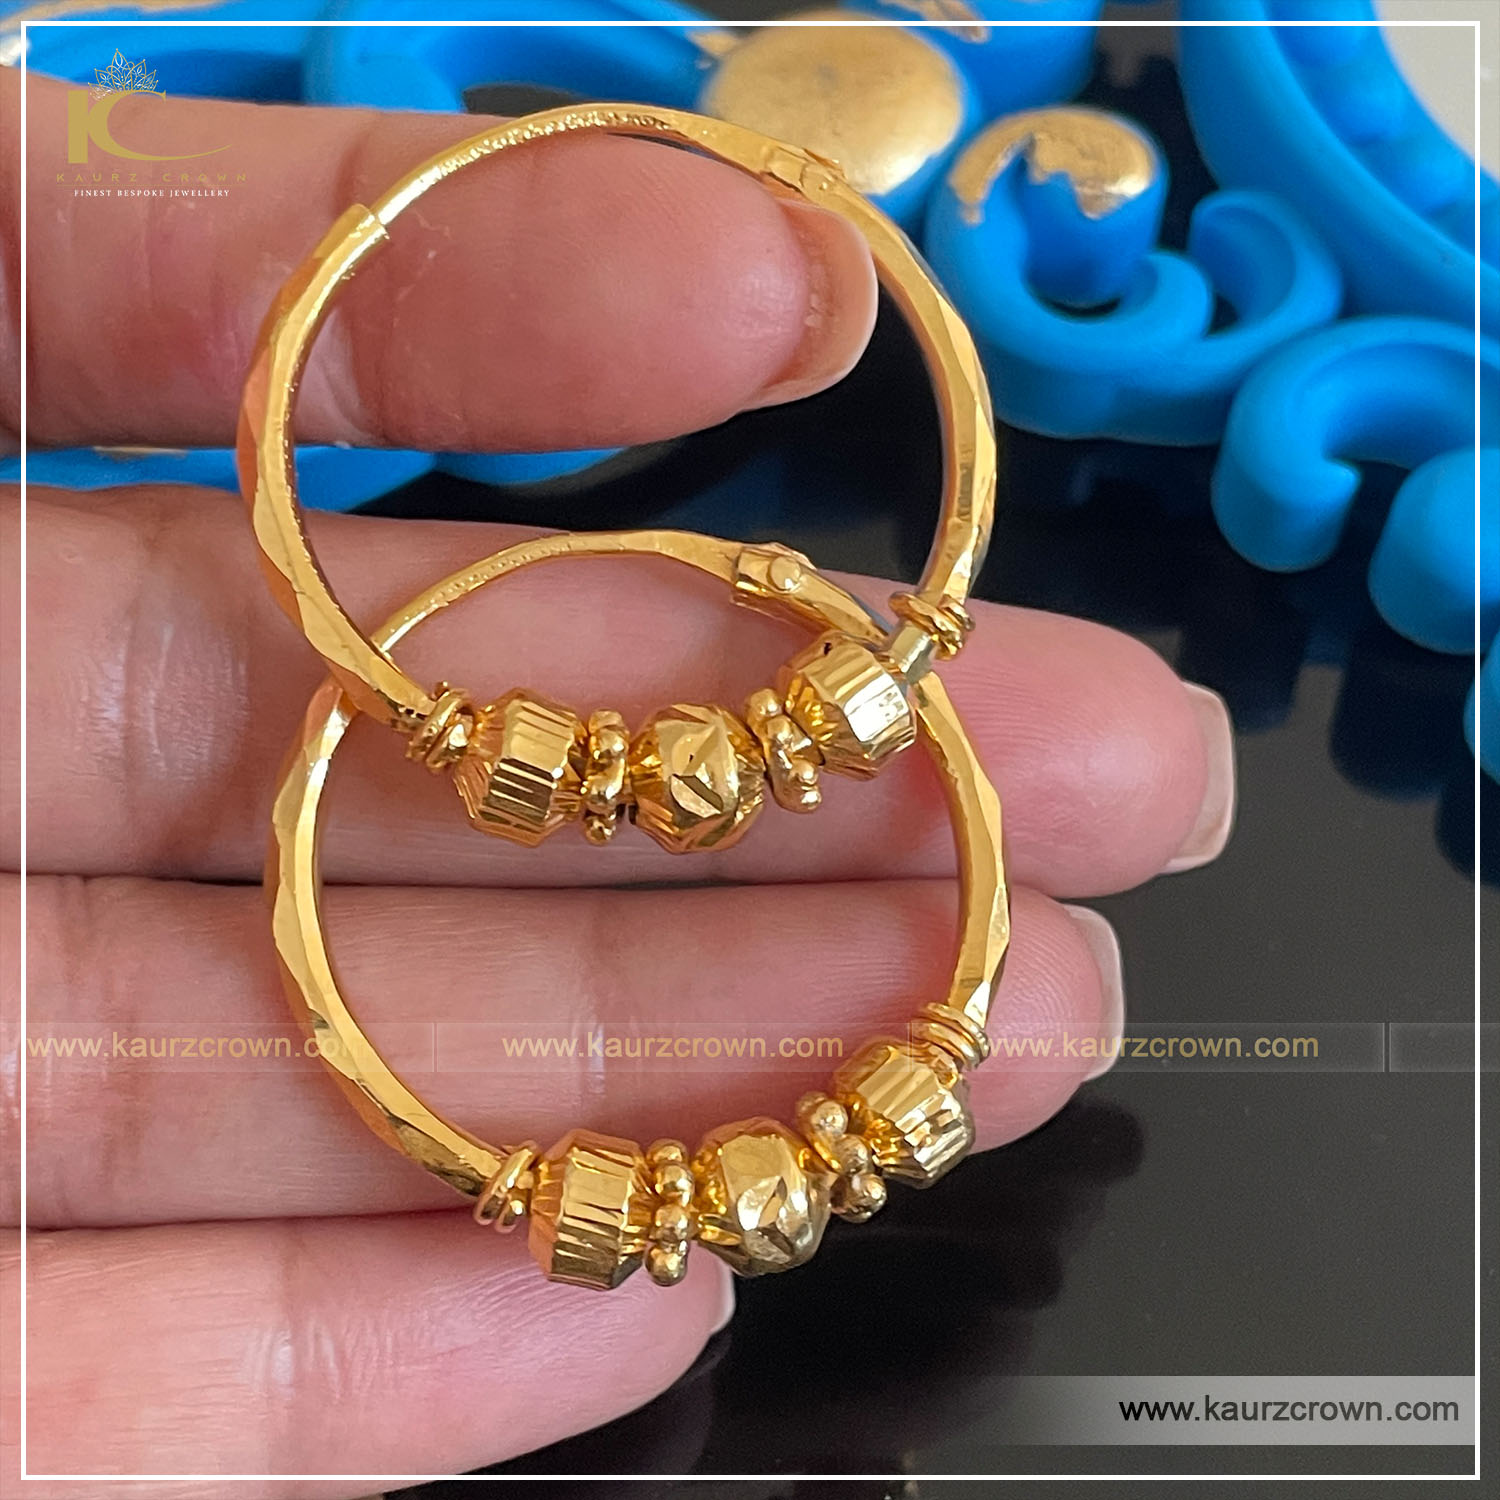 Products | Earring | Gold Hoop Earring | Mehr Gold and Jewelry Online Store